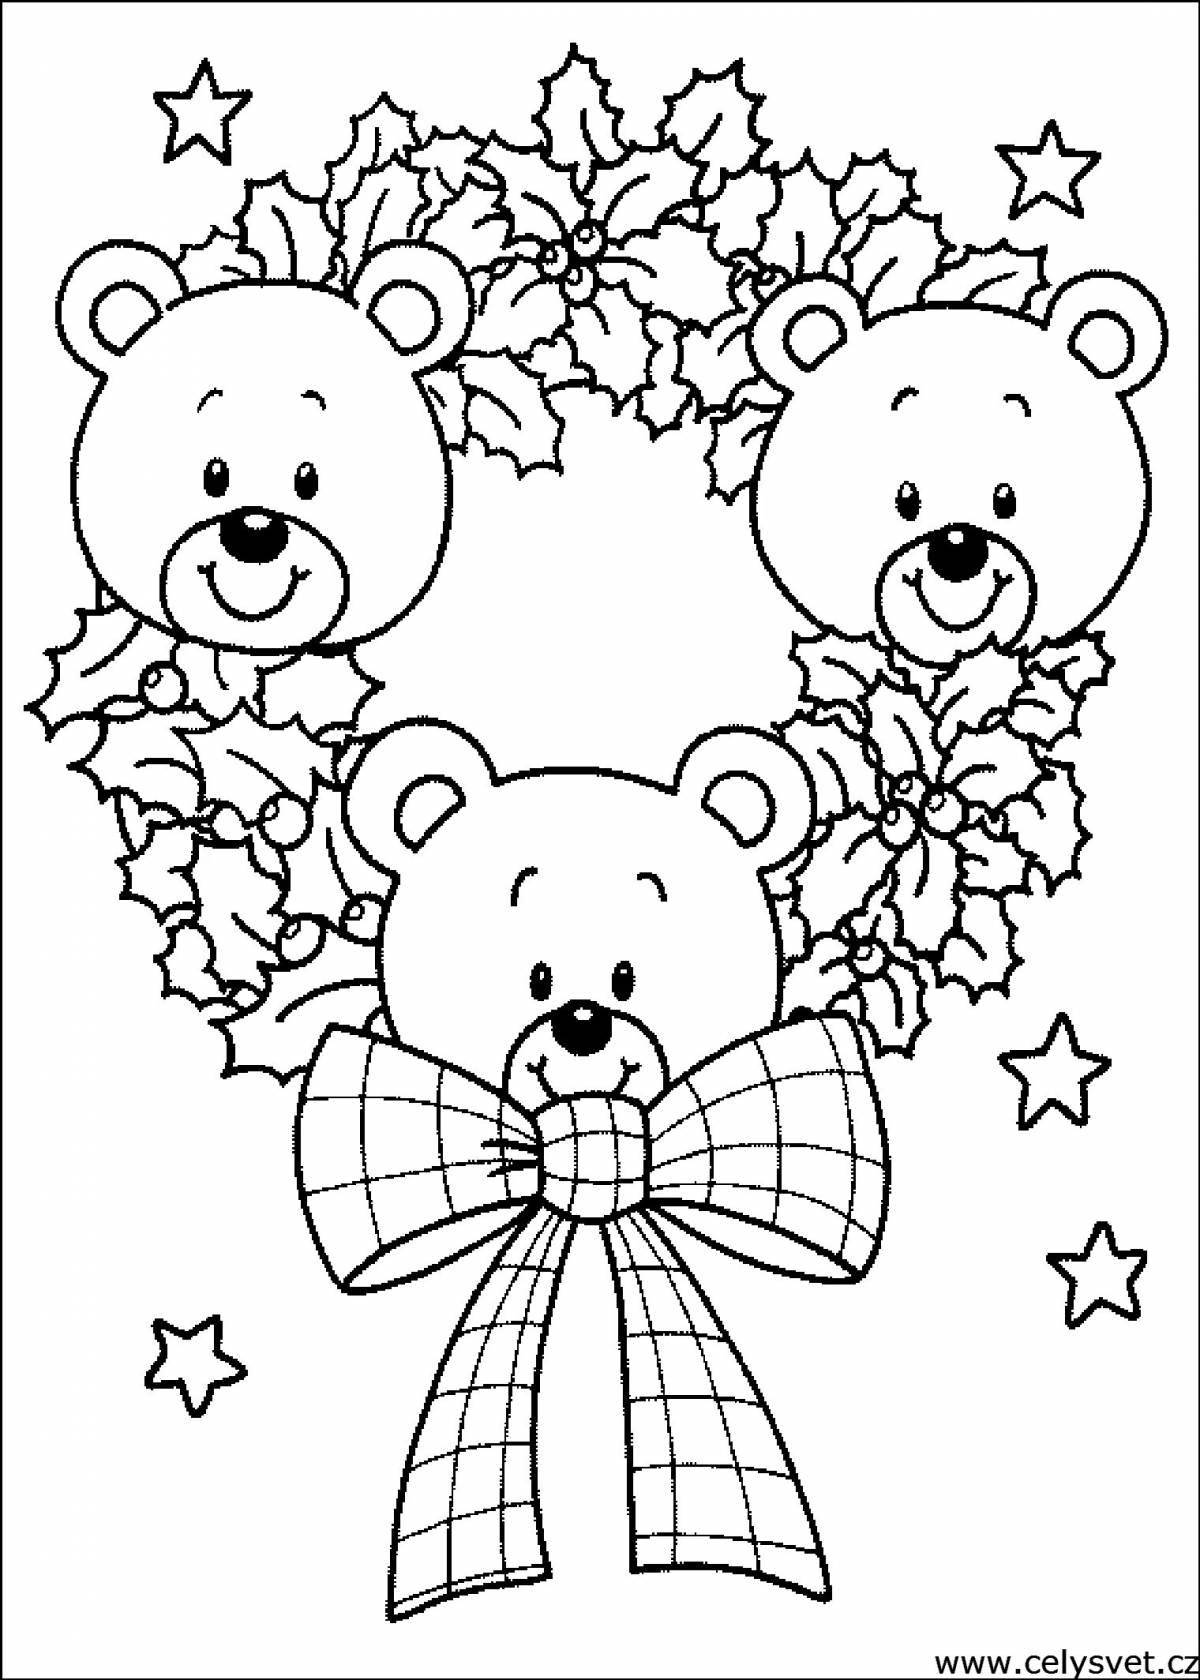 Color-explosion coloring page new for kids